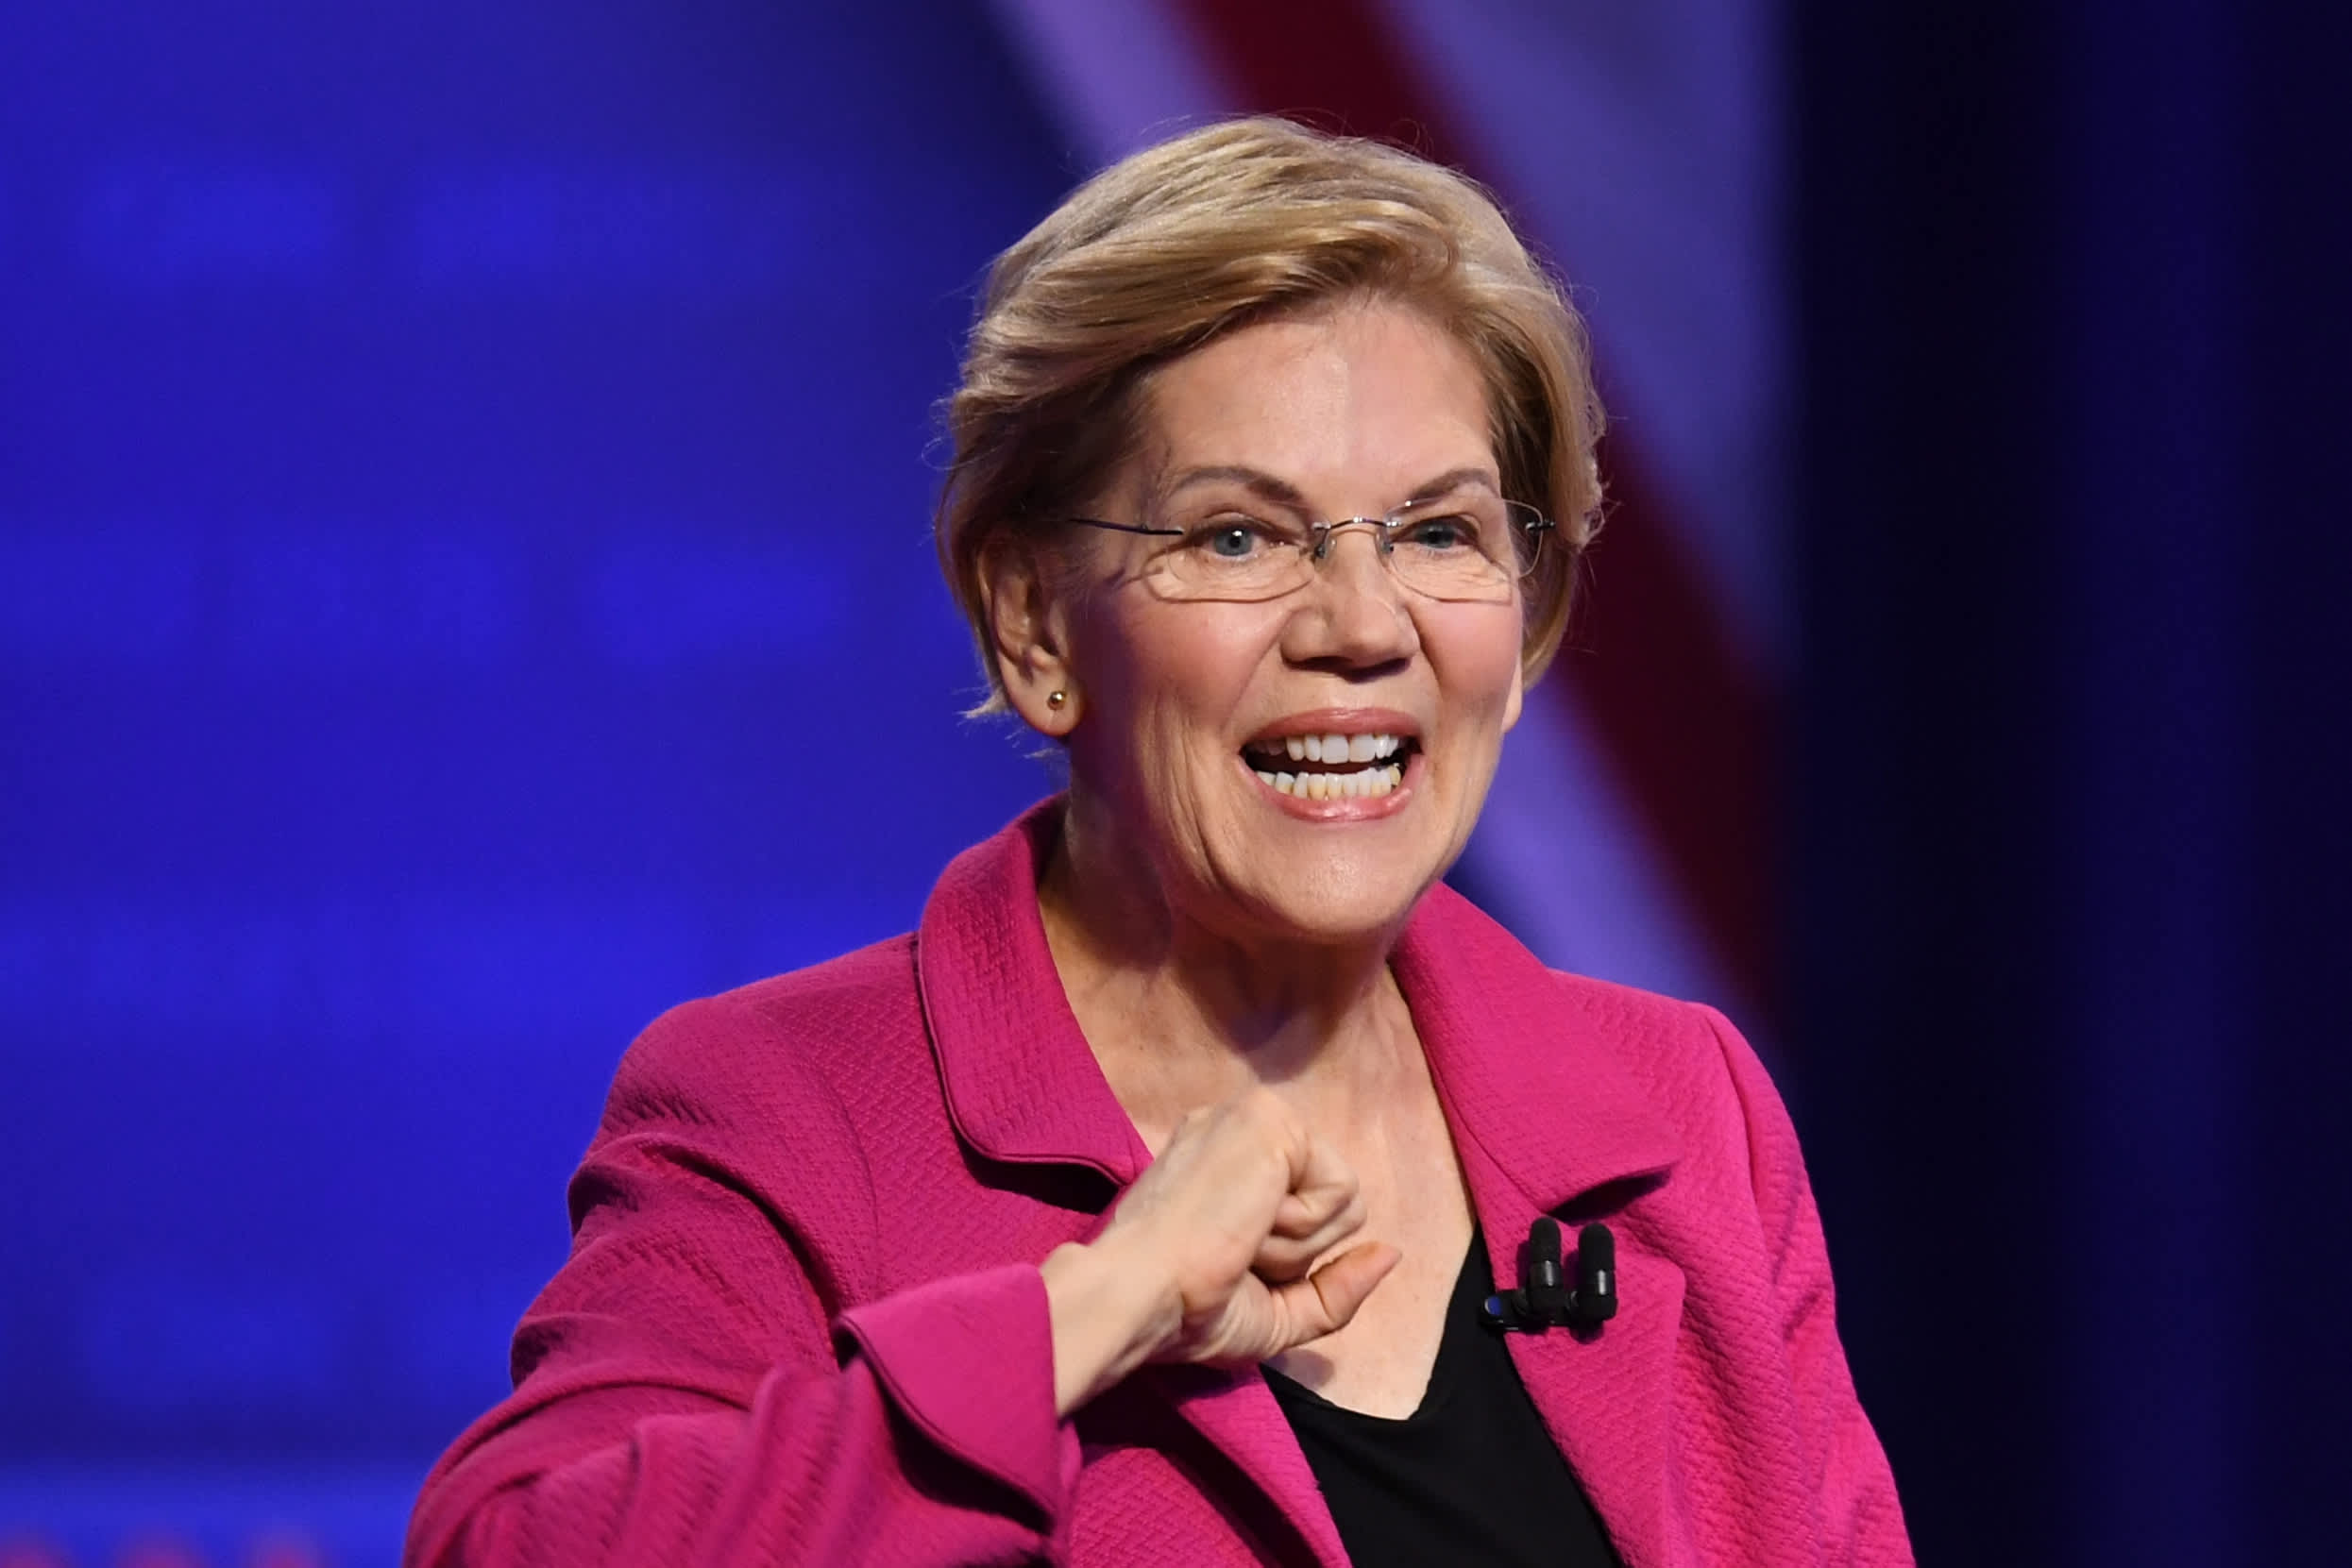 Credit: ROBYN BECK | AFP | Getty Images
Source: https://www.cnbc.com/2020/01/13/elizabeth-warren-felt-like-a-failure-for-not-being-a-housewife.html